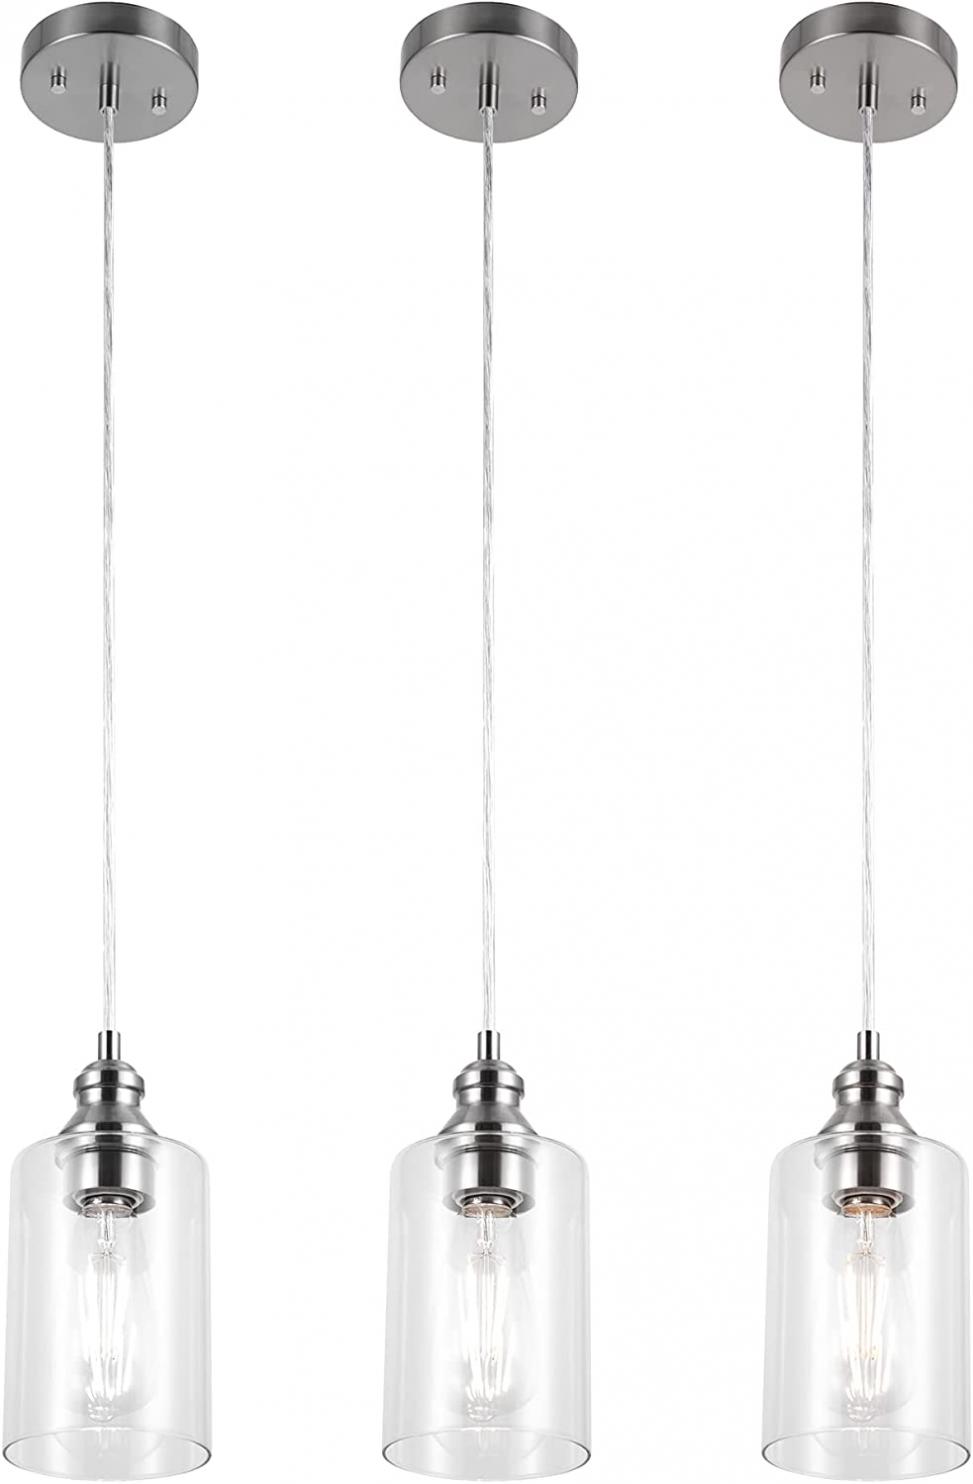 Gruenlich Pendant Lighting Fixture for Kitchen and Dining Room, Hanging Ceiling Lighting Fixture, E26 Medium Base, Metal Construction with Clear Glass, Bulb not Included, 3-Pack (Nickel Finish)